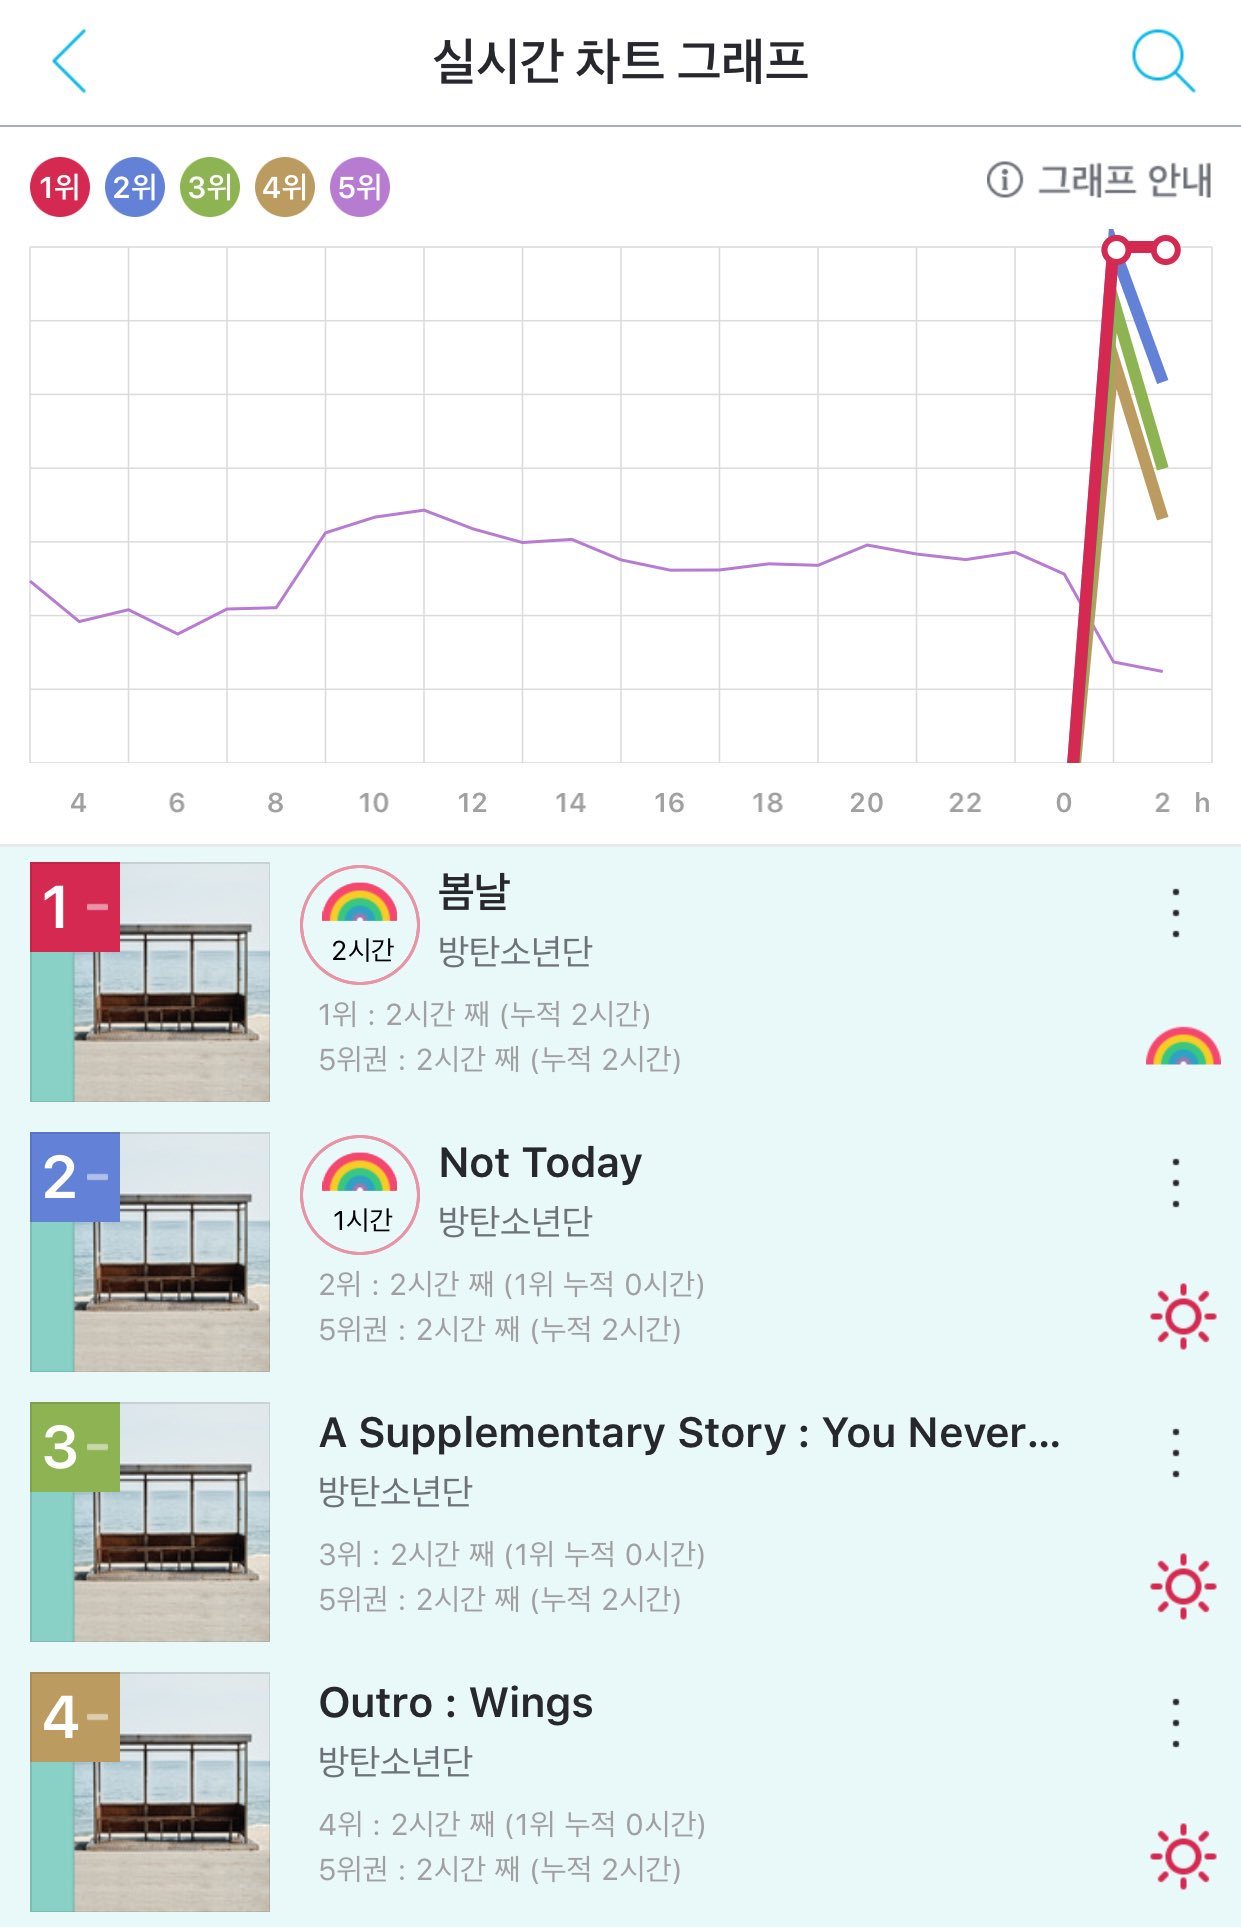 Melon Real Time Chart